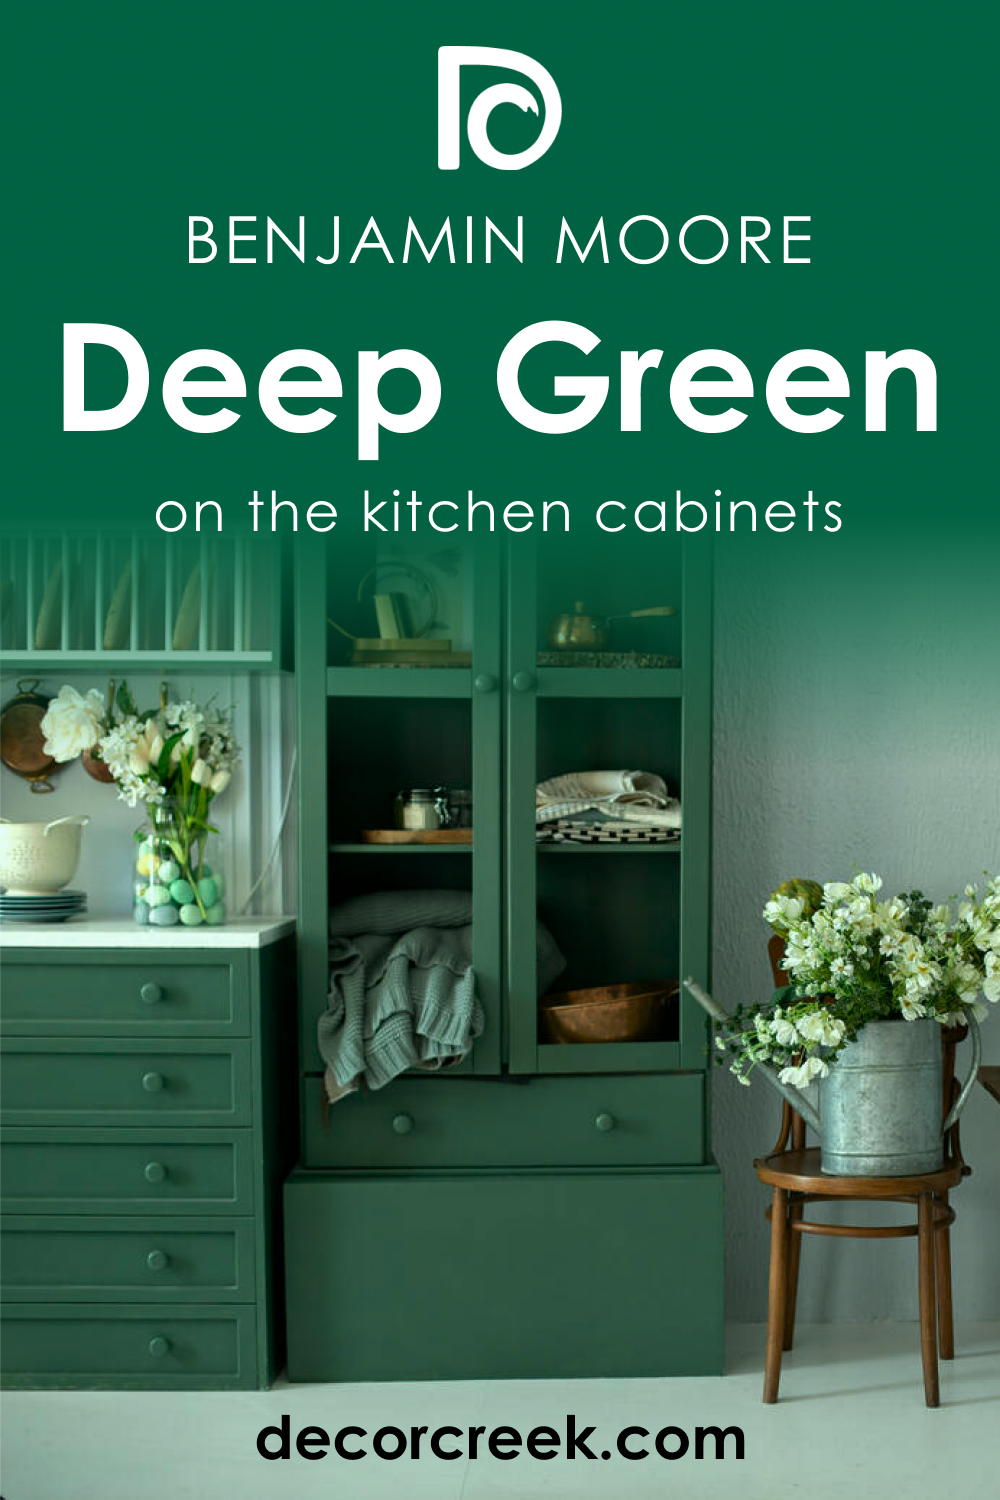 How to Use Deep Green 2039-10 on the Kitchen Cabinets?